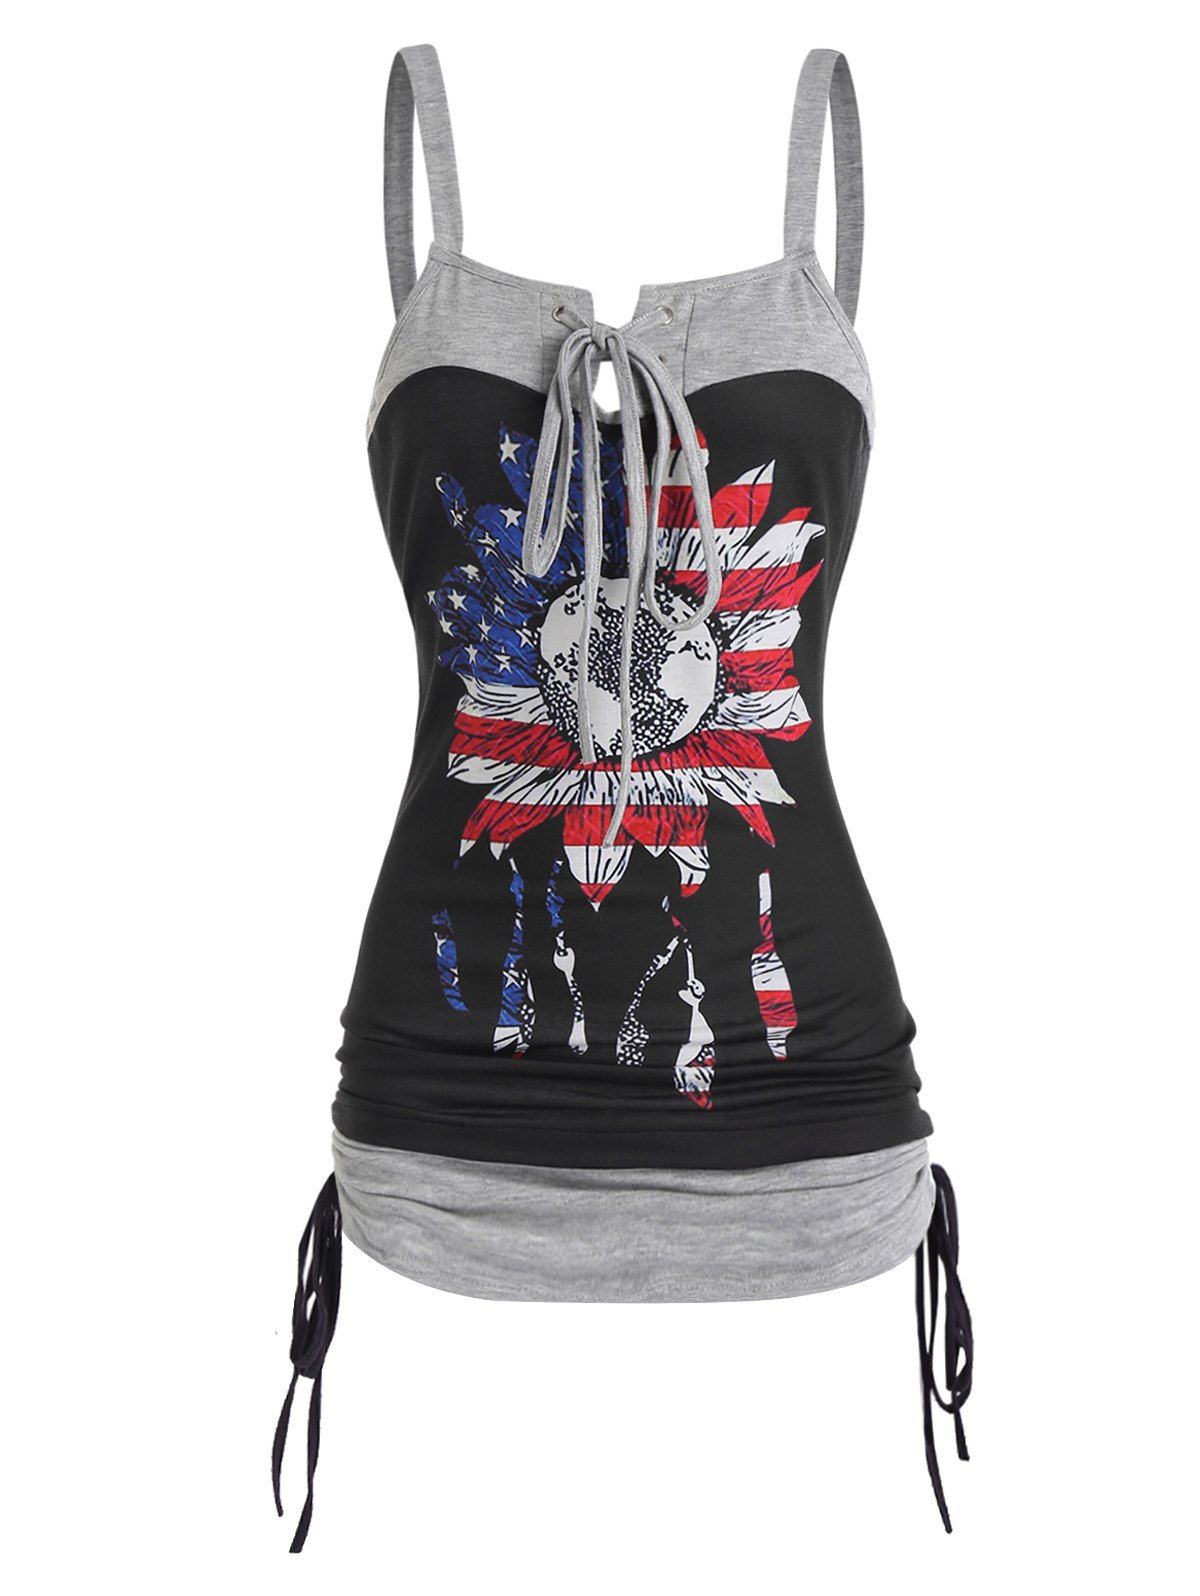 Floral Print Casual Tank Top Contrast Colorblock Lace Up Cinched American Flag Summer Top - BLACK M